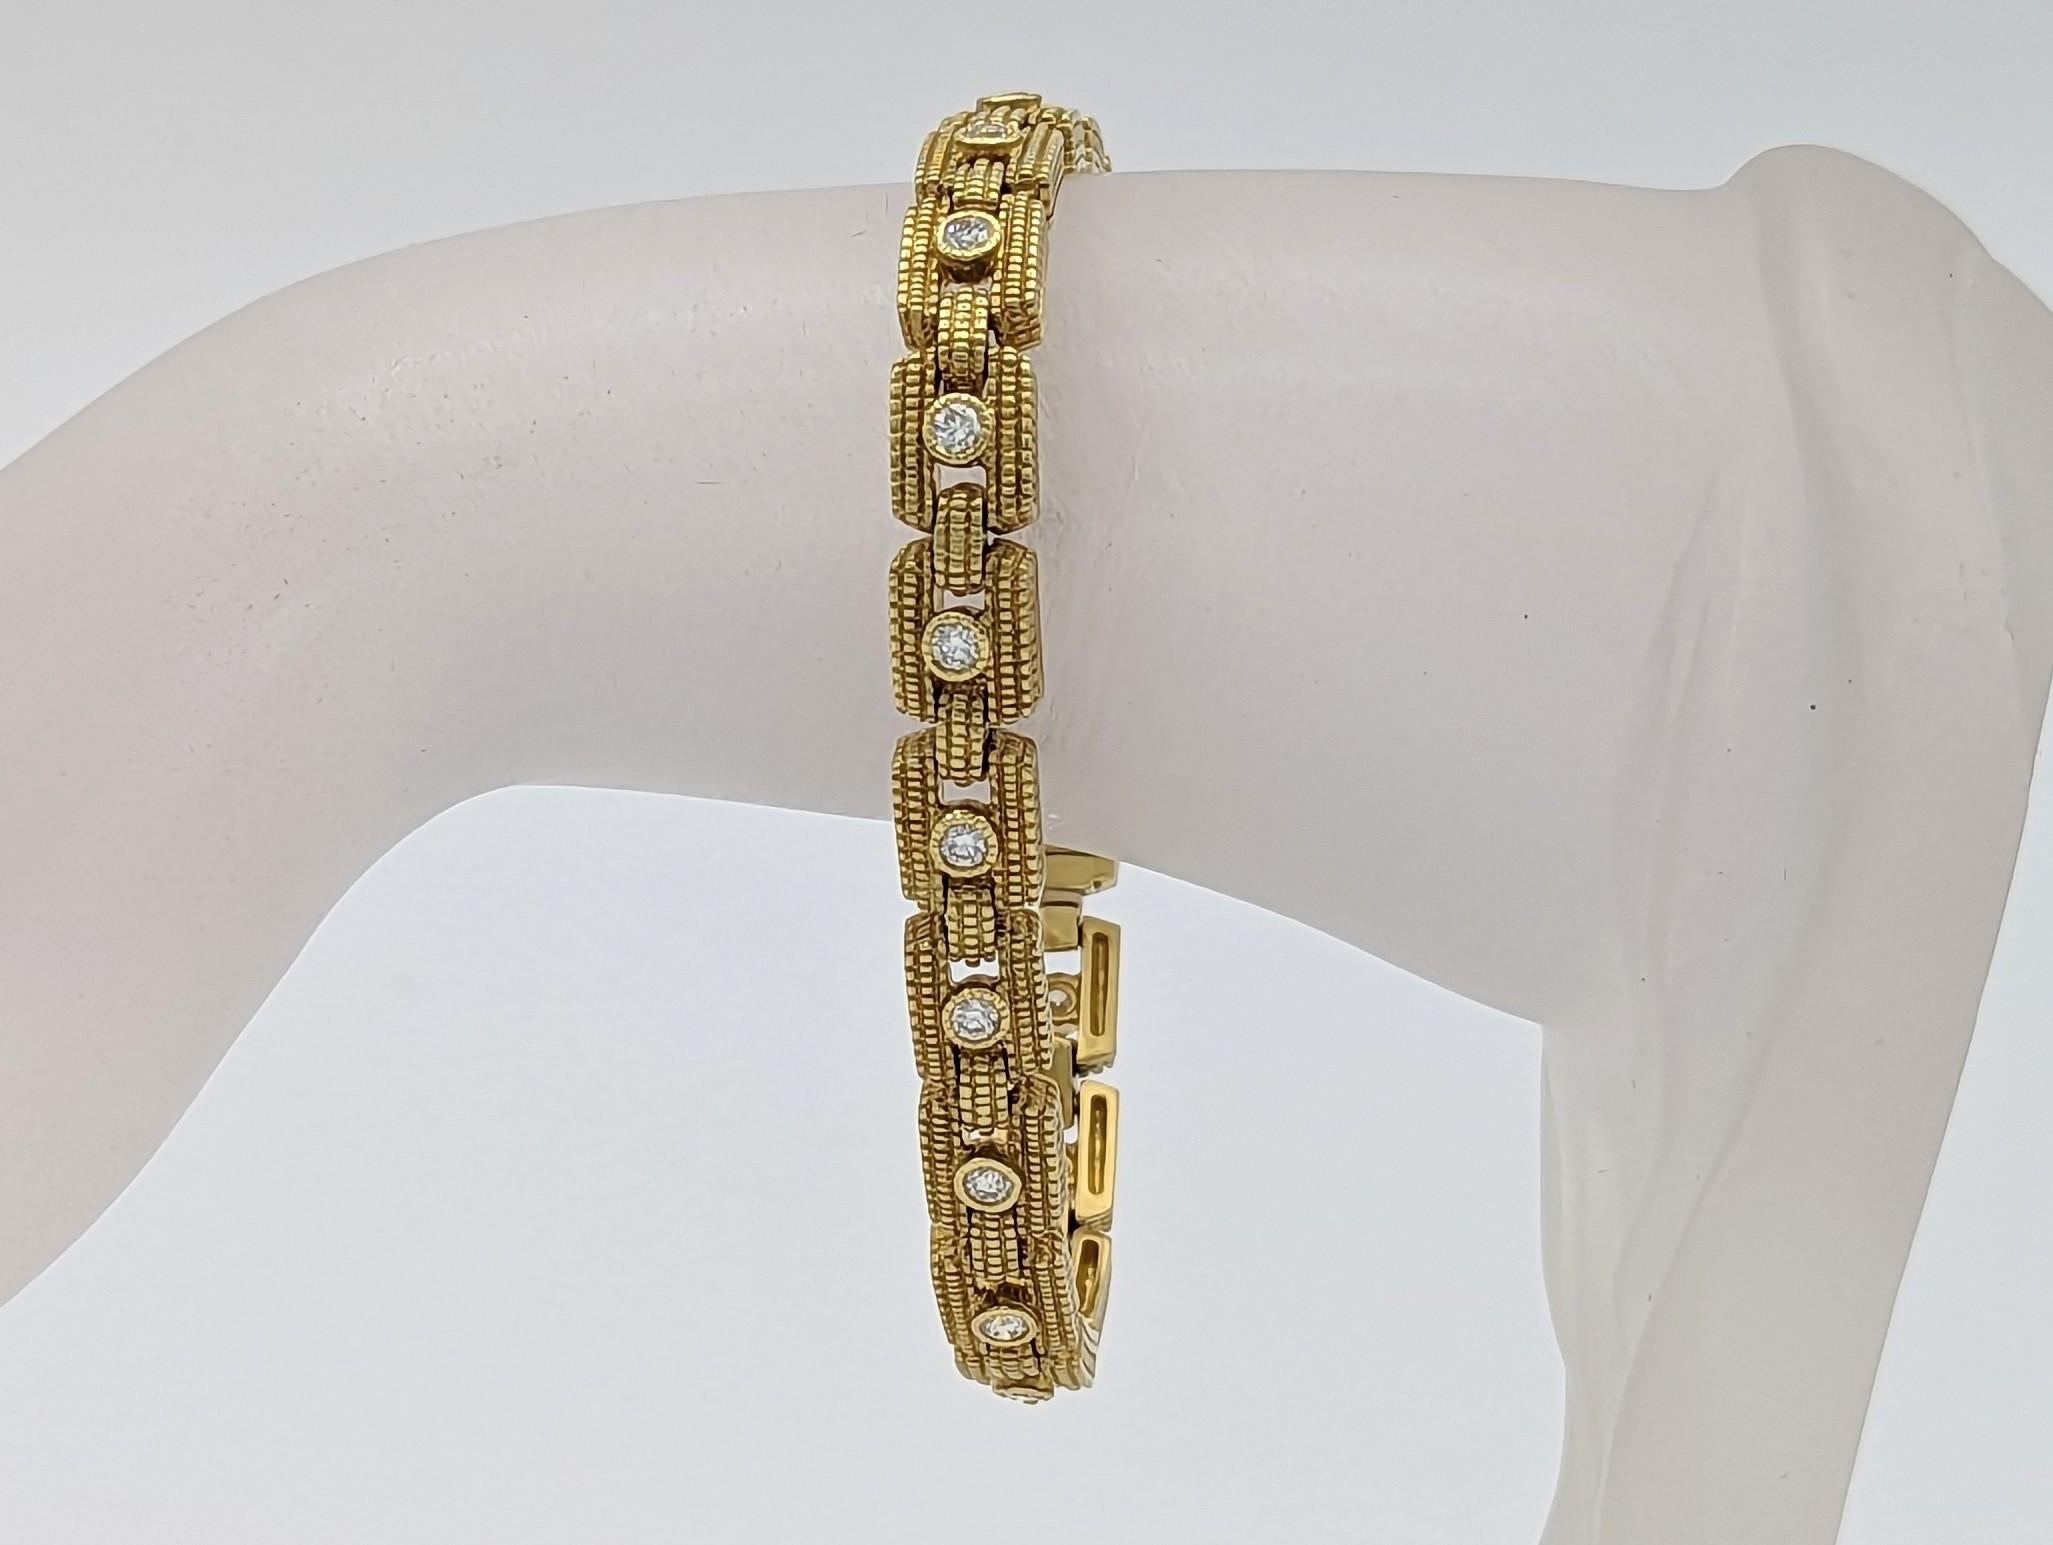 Beautiful Judith Ripka bracelet with 1.03 ct. good quality white diamond rounds and 18k yellow gold.  Handmade and length is 7.25